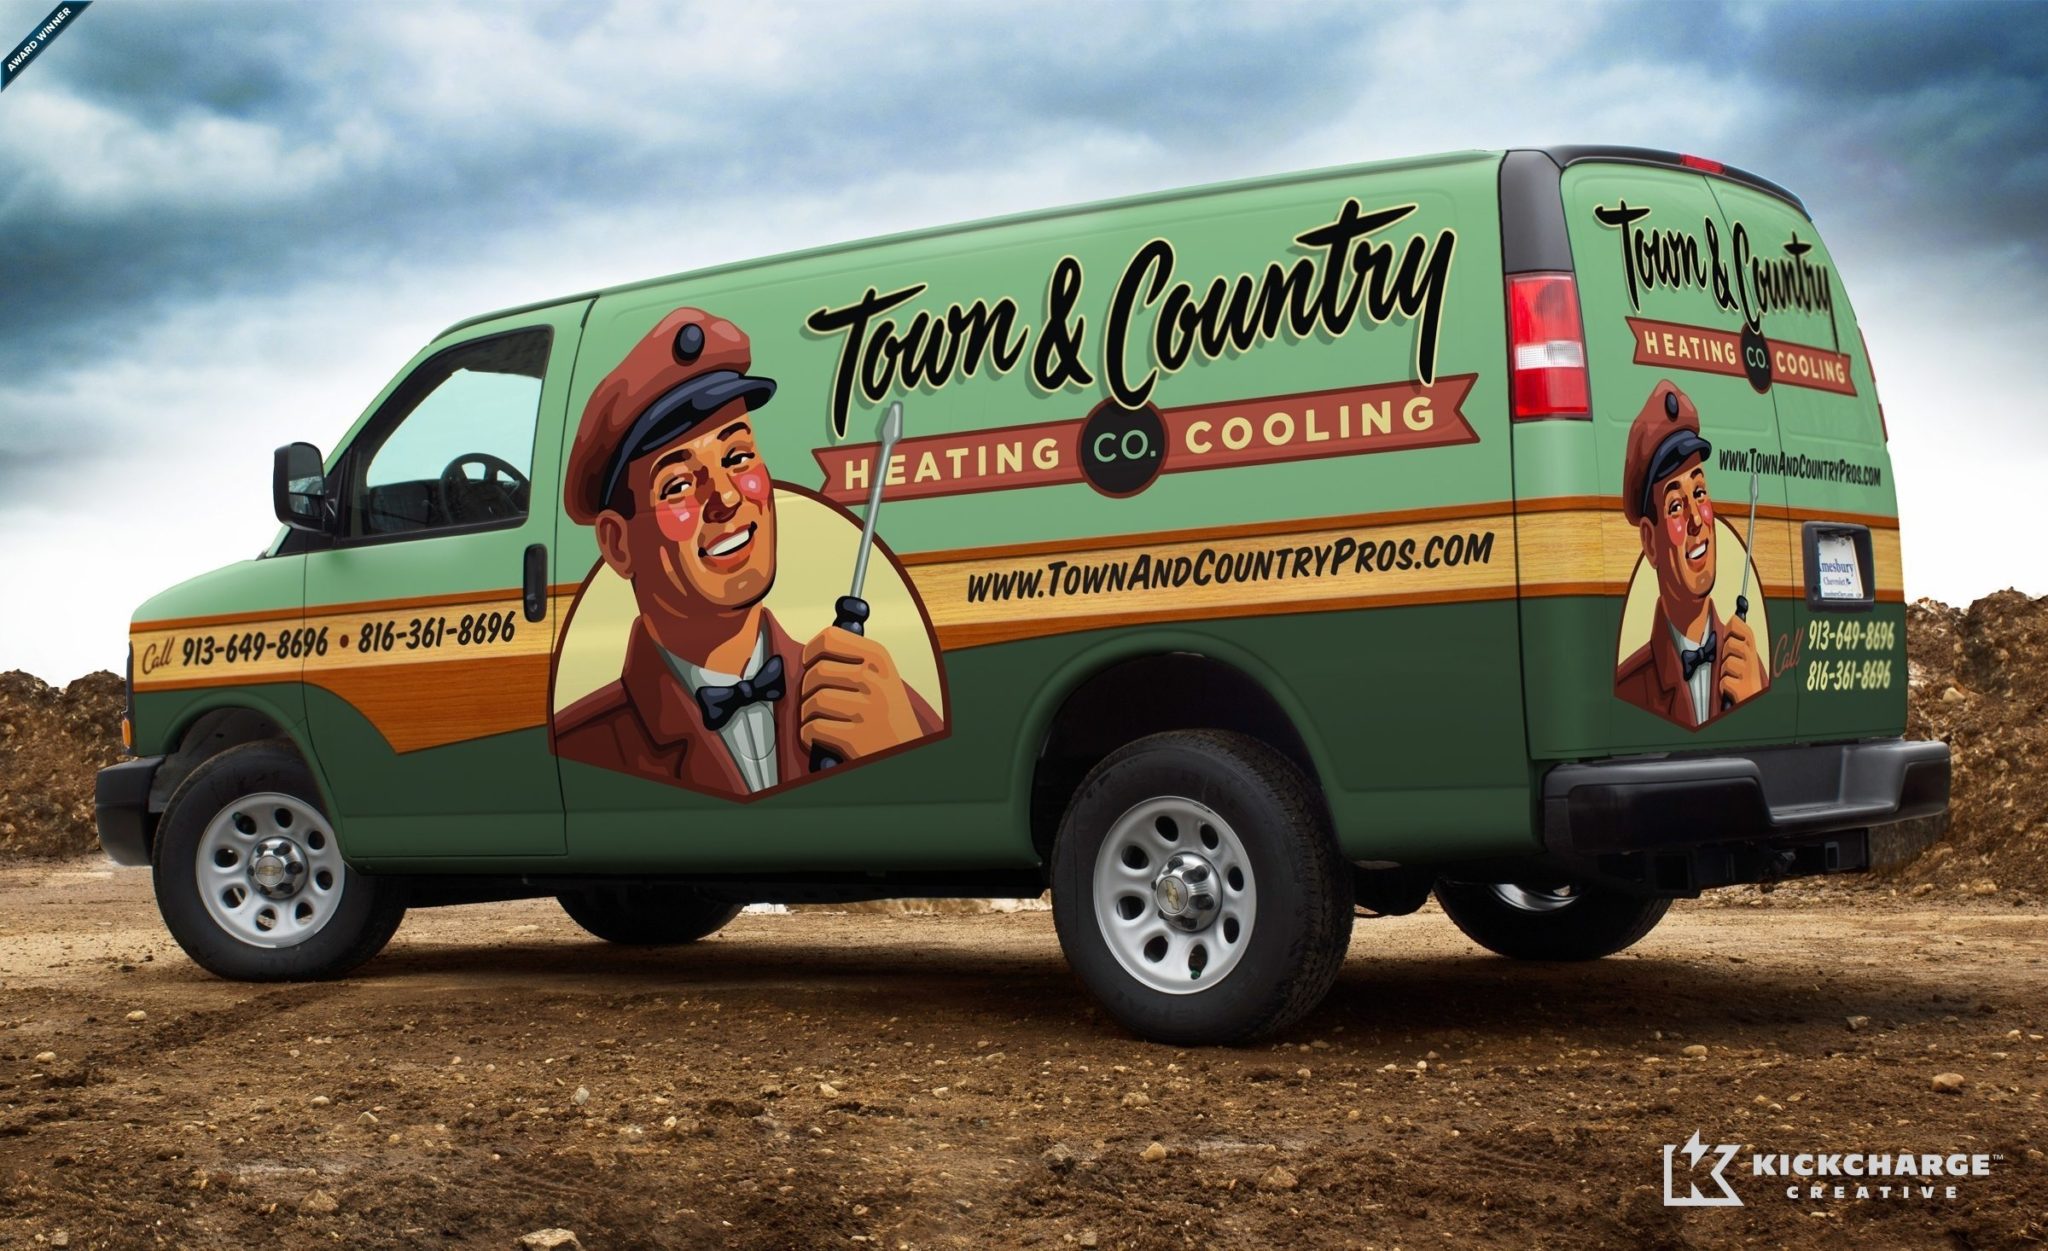 A great brand formed the foundation for this award-winning truck wrap for HVAC company in the midwest.